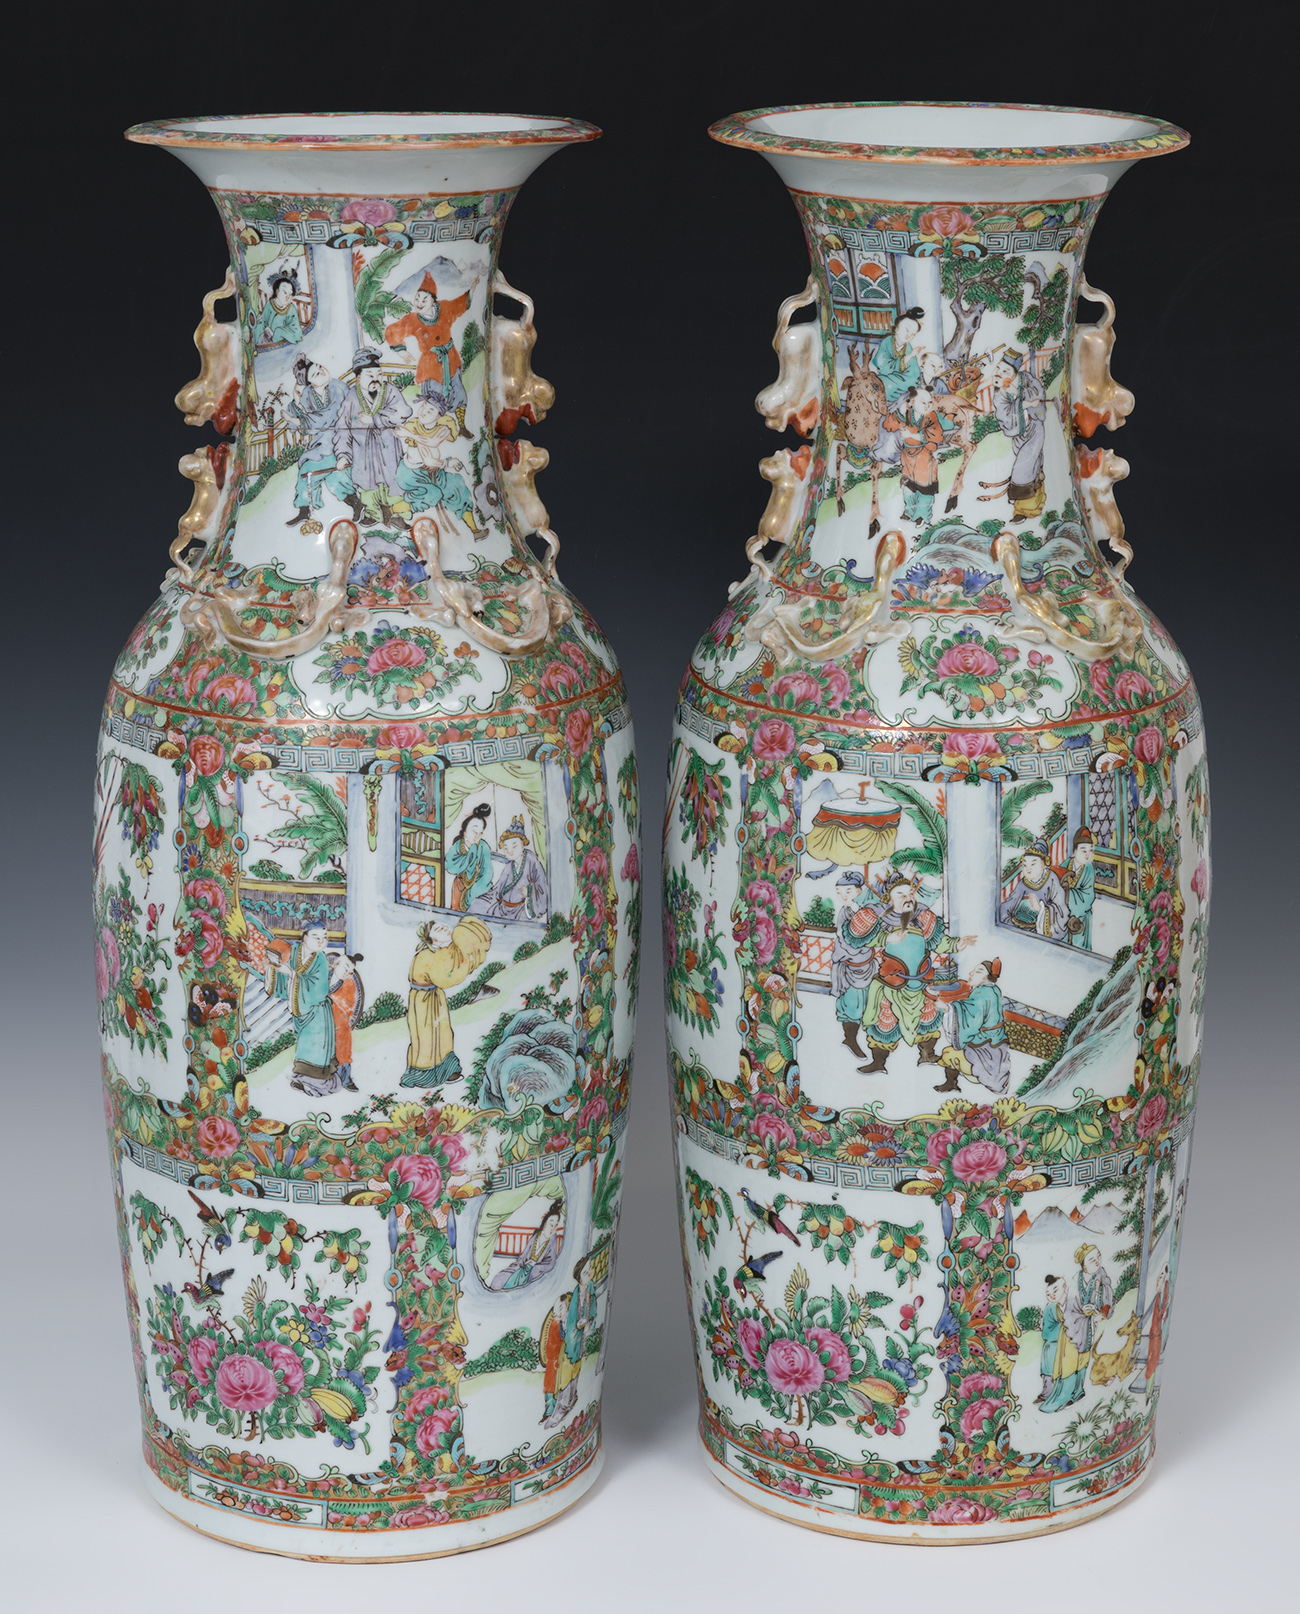 Pair of vases after models of the Green Family; Canton, China 19th century.Enamelled porcelain.The - Image 3 of 7